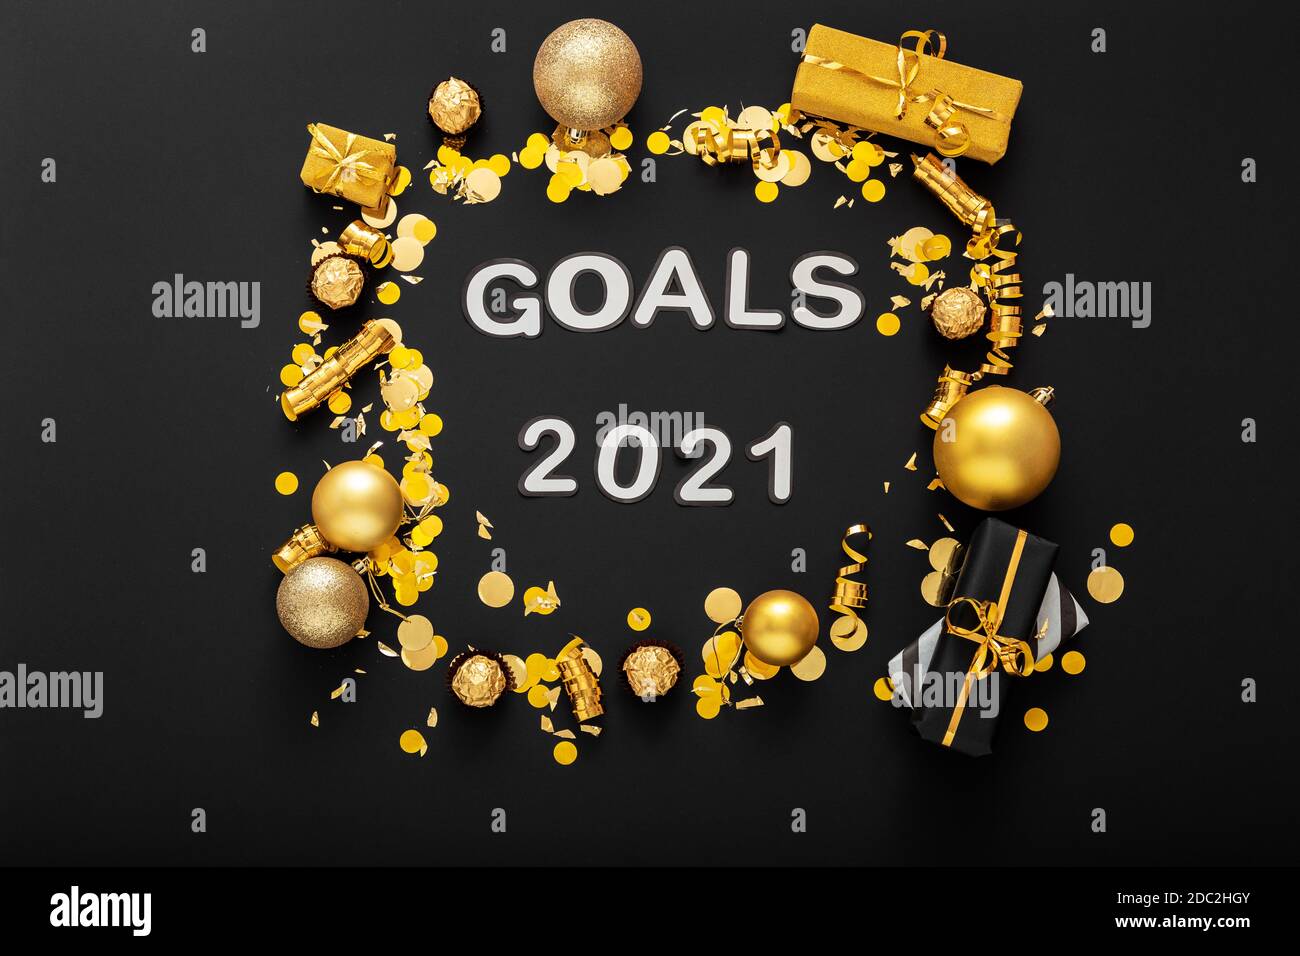 2021 Goals text on black background in frame made of gold Christmas festive decor, confetti balls. New year 2021 goals, resolution check list with Stock Photo